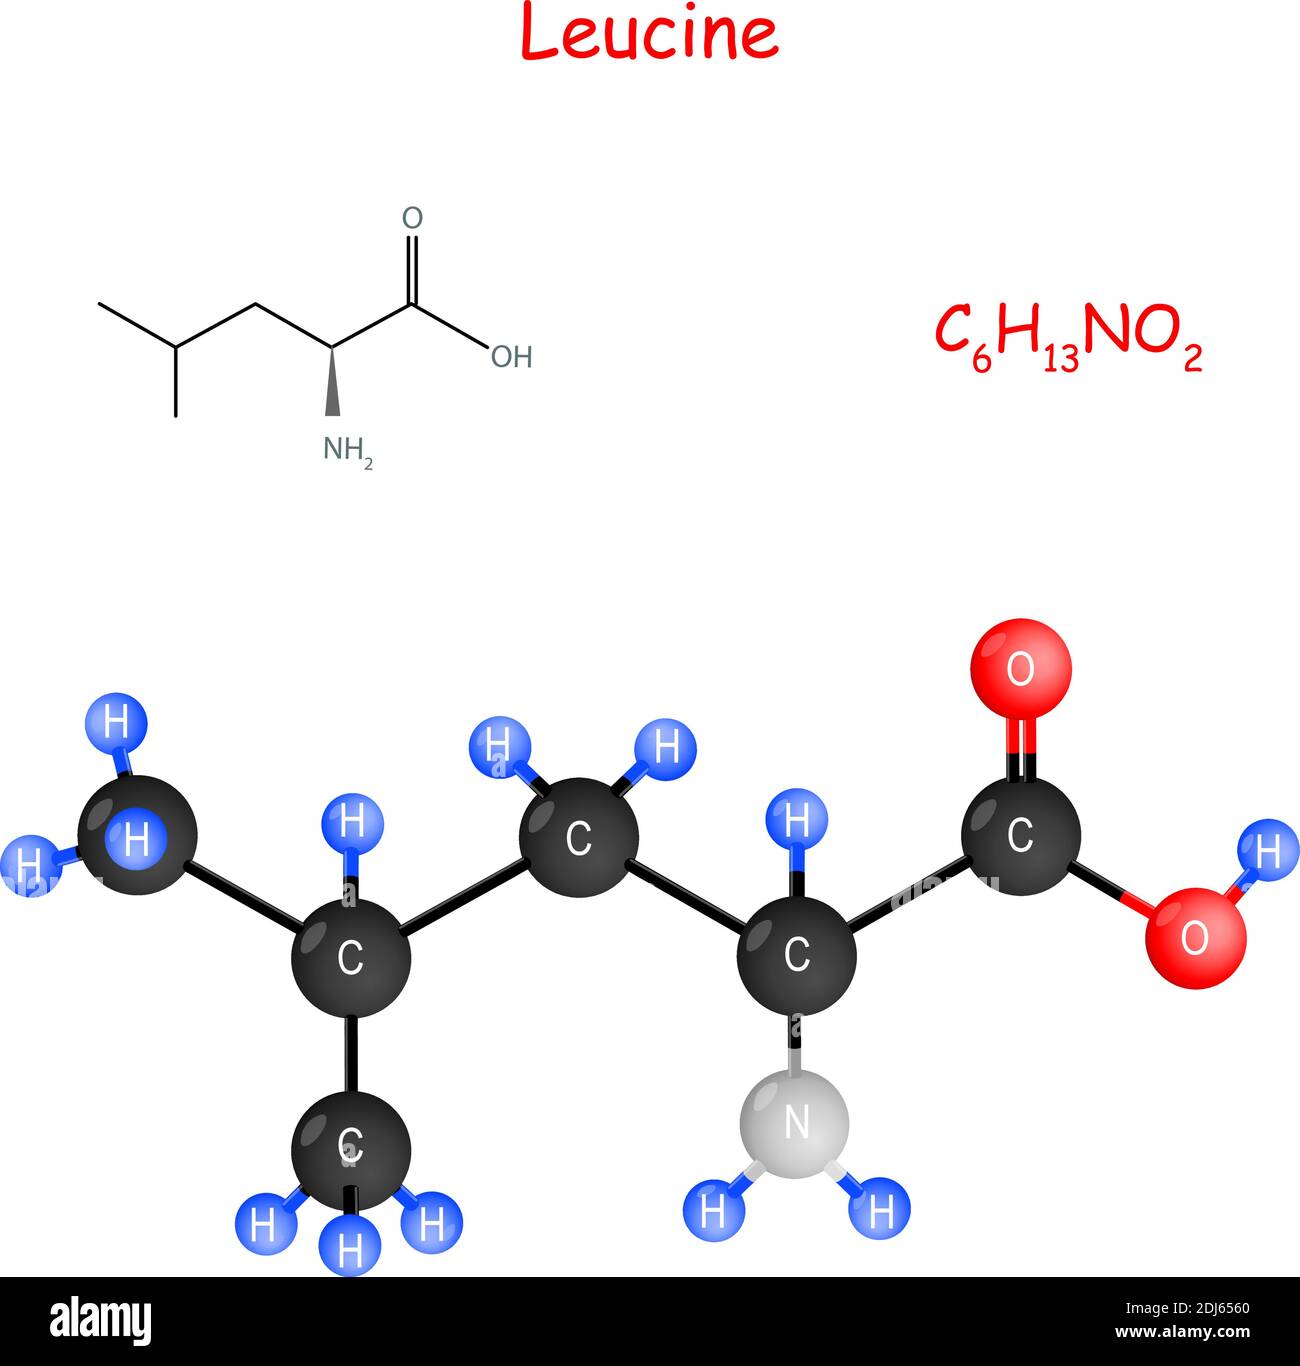 Leucine is an essential amino acid for biosynthesis of proteins. flavor enhancer. Chemical structural formula and model of molecule. C6H13NO2. Vector Stock Vector